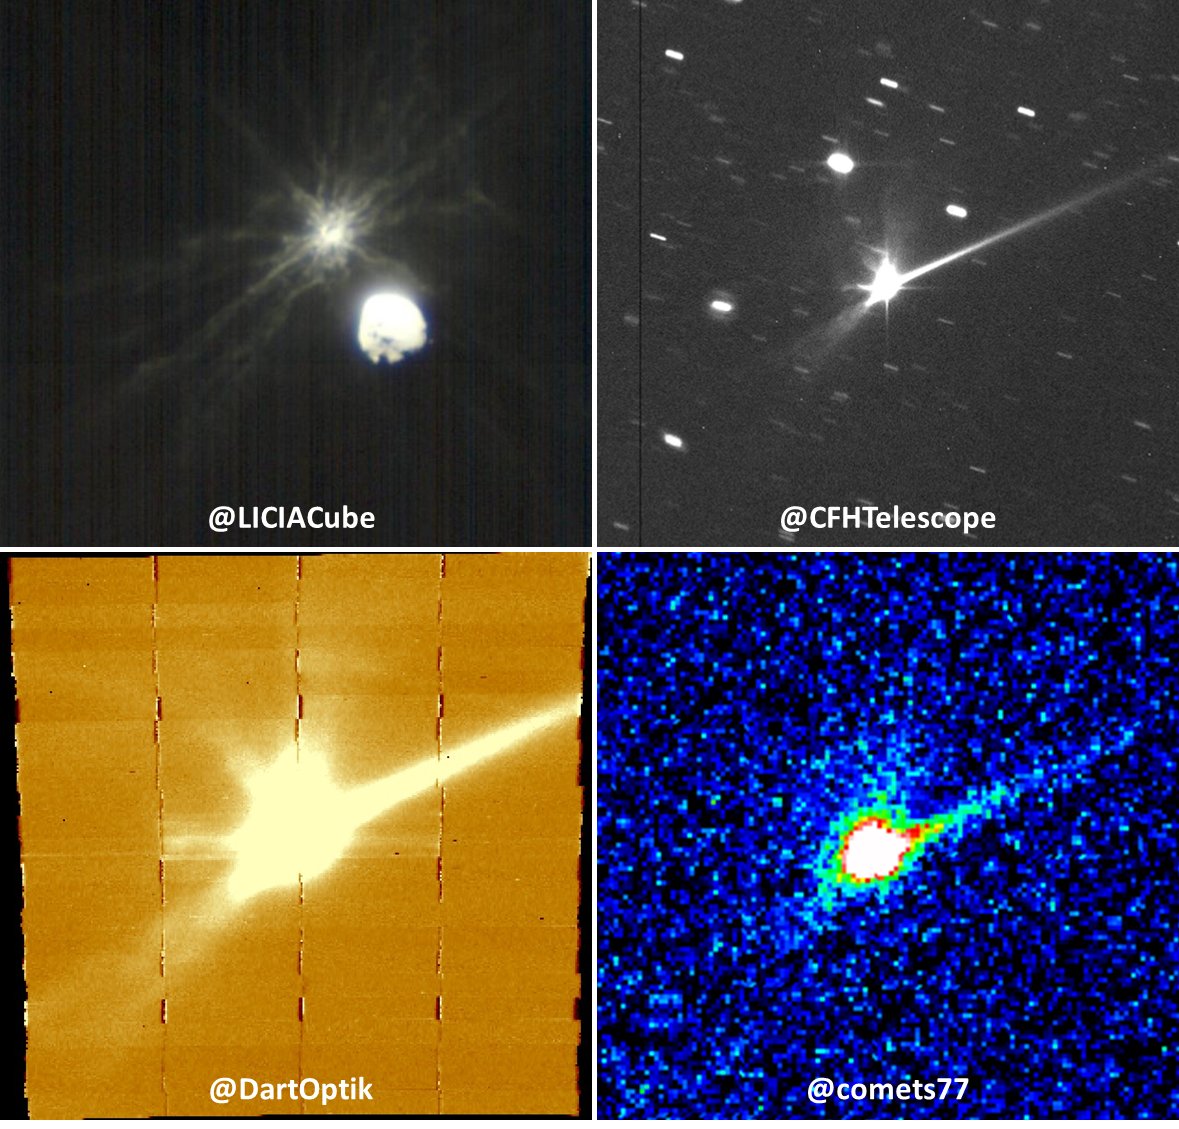 Asteroid Didymos/Dimorphos grow a tail 🦕

Some of the dust and debris ejected from Dimorphos after collision with #DARTMission has coalesced into a long tail, as seen in these image taken by @LICIACube shortly after impact and by ground telescopes the day after the impact.
1/n